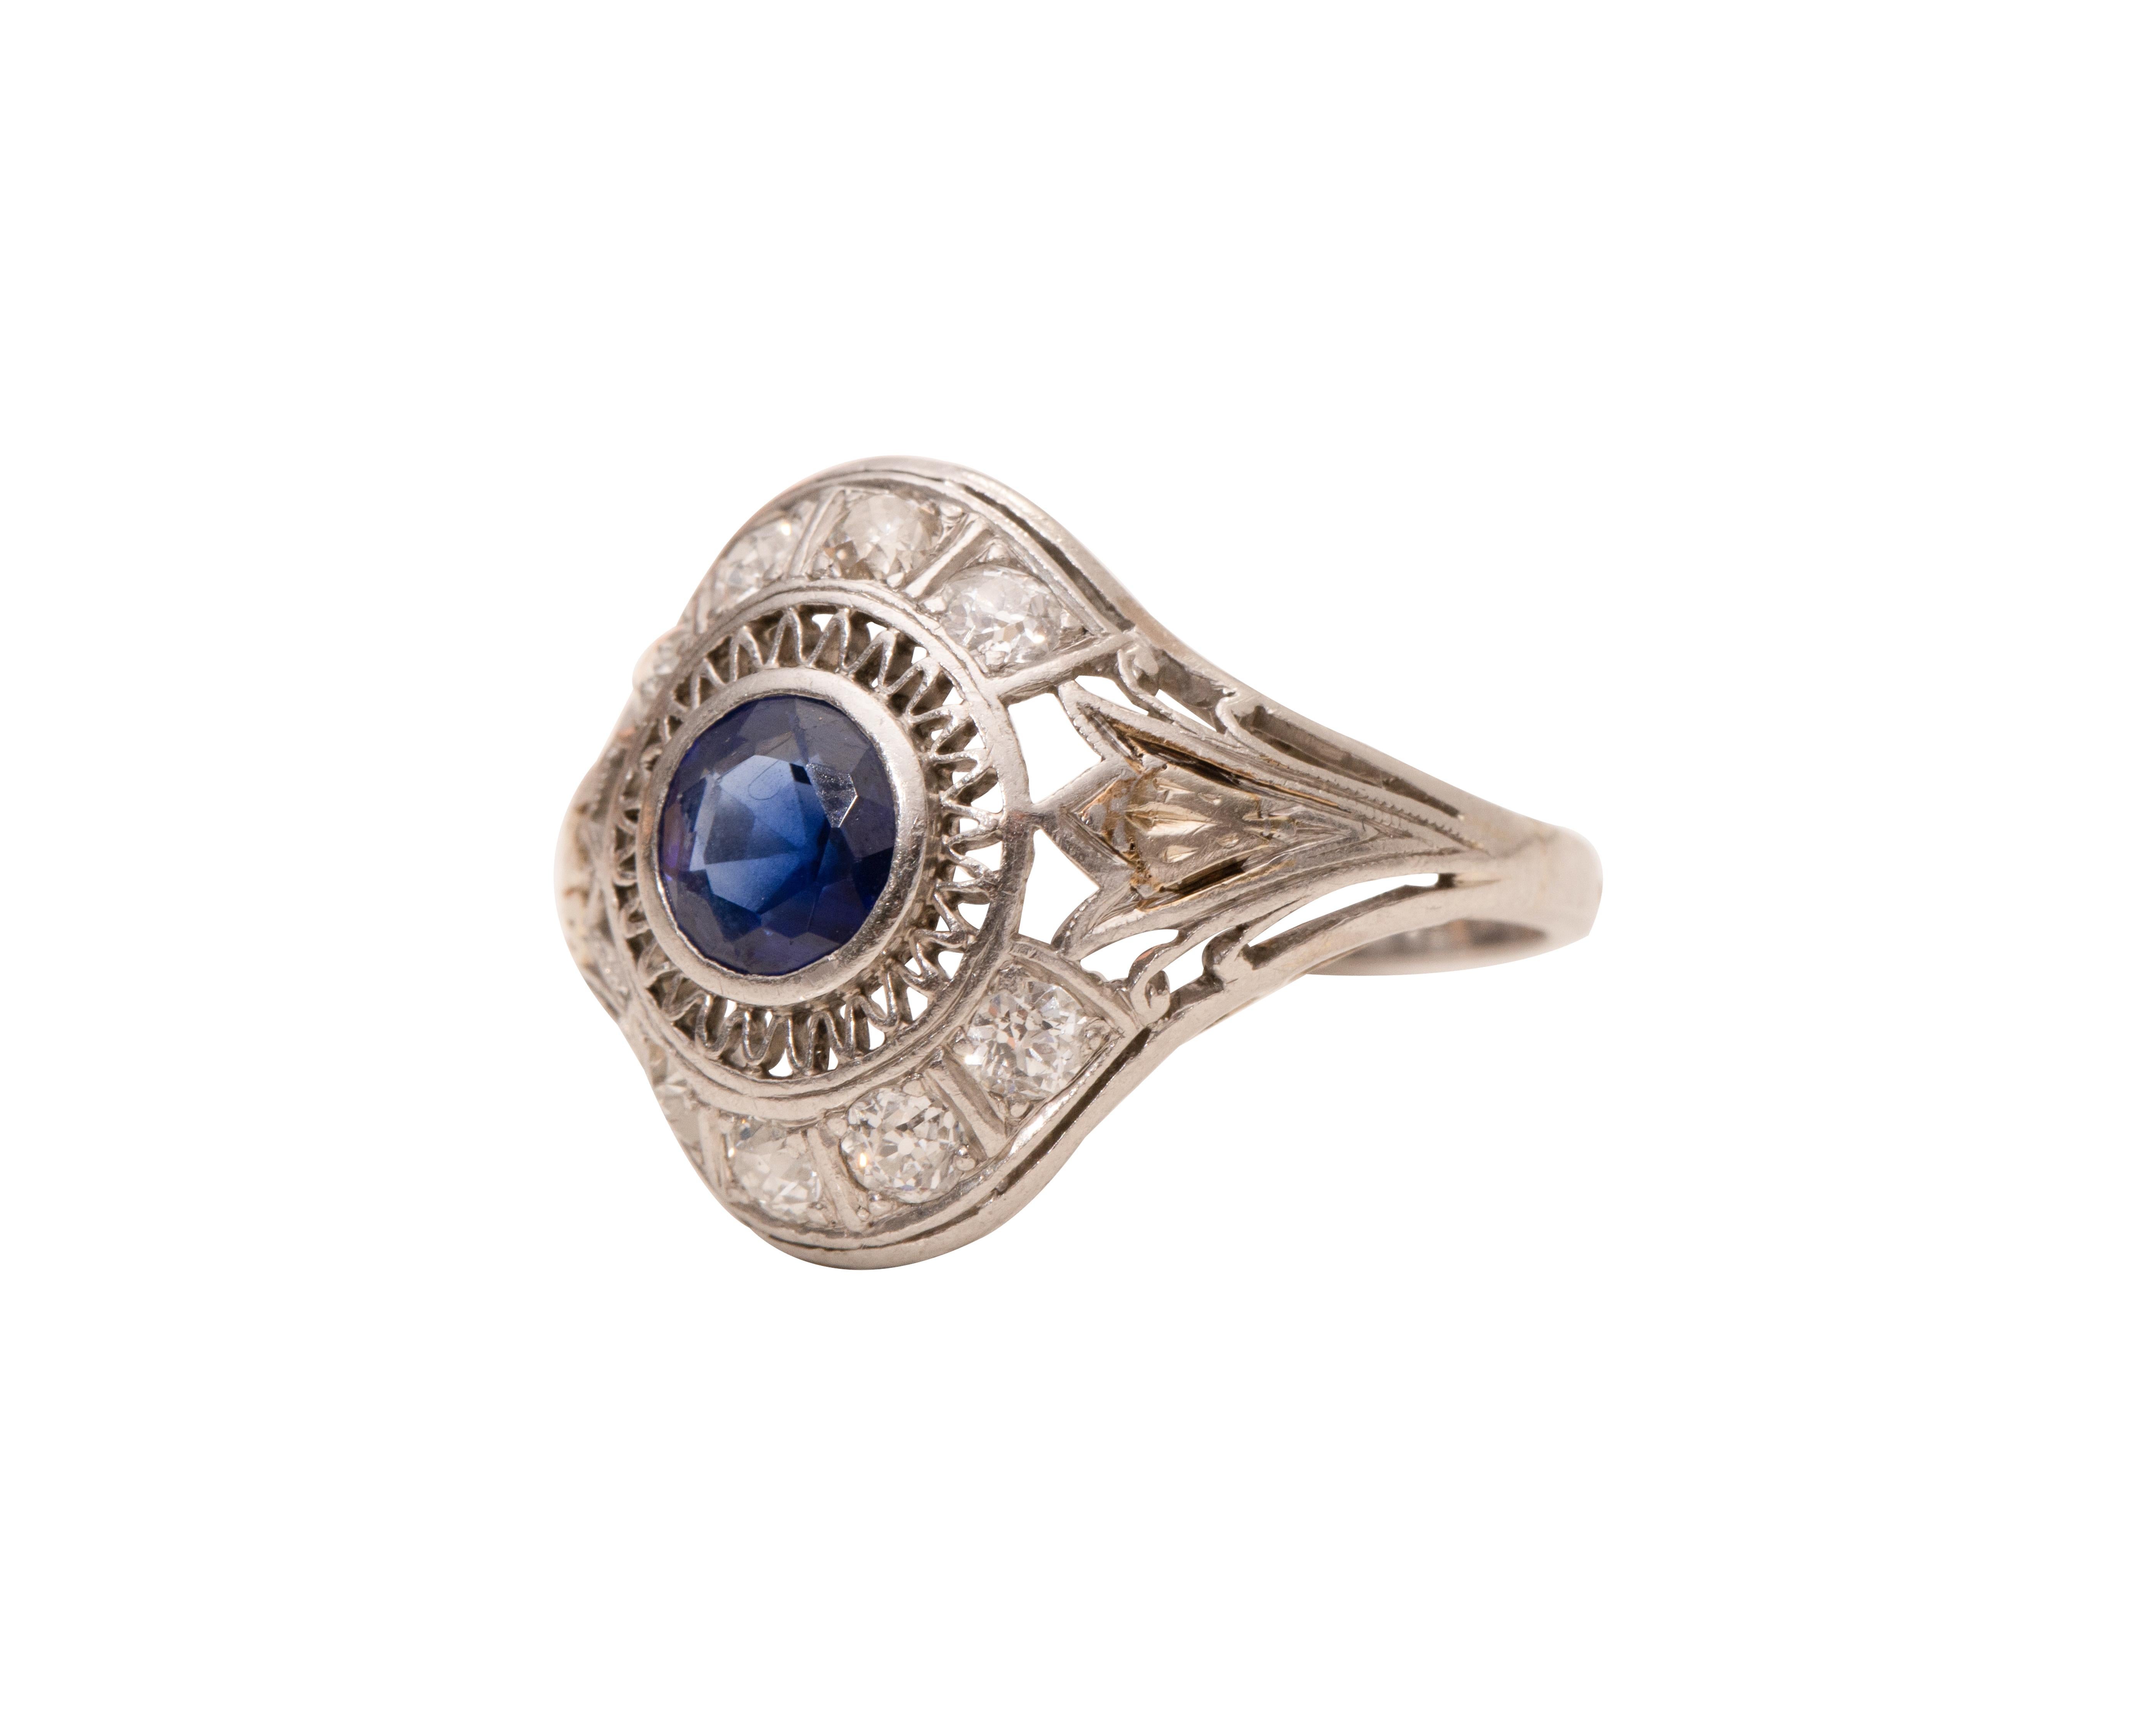 Here we have a stunning diamond and sapphire Art Deco era cocktail ring. The Platinum band has an intricate filigree and an etched design that accents the diamonds and deep blue sapphire gorgeously, taking this beauty to the next level. This classic